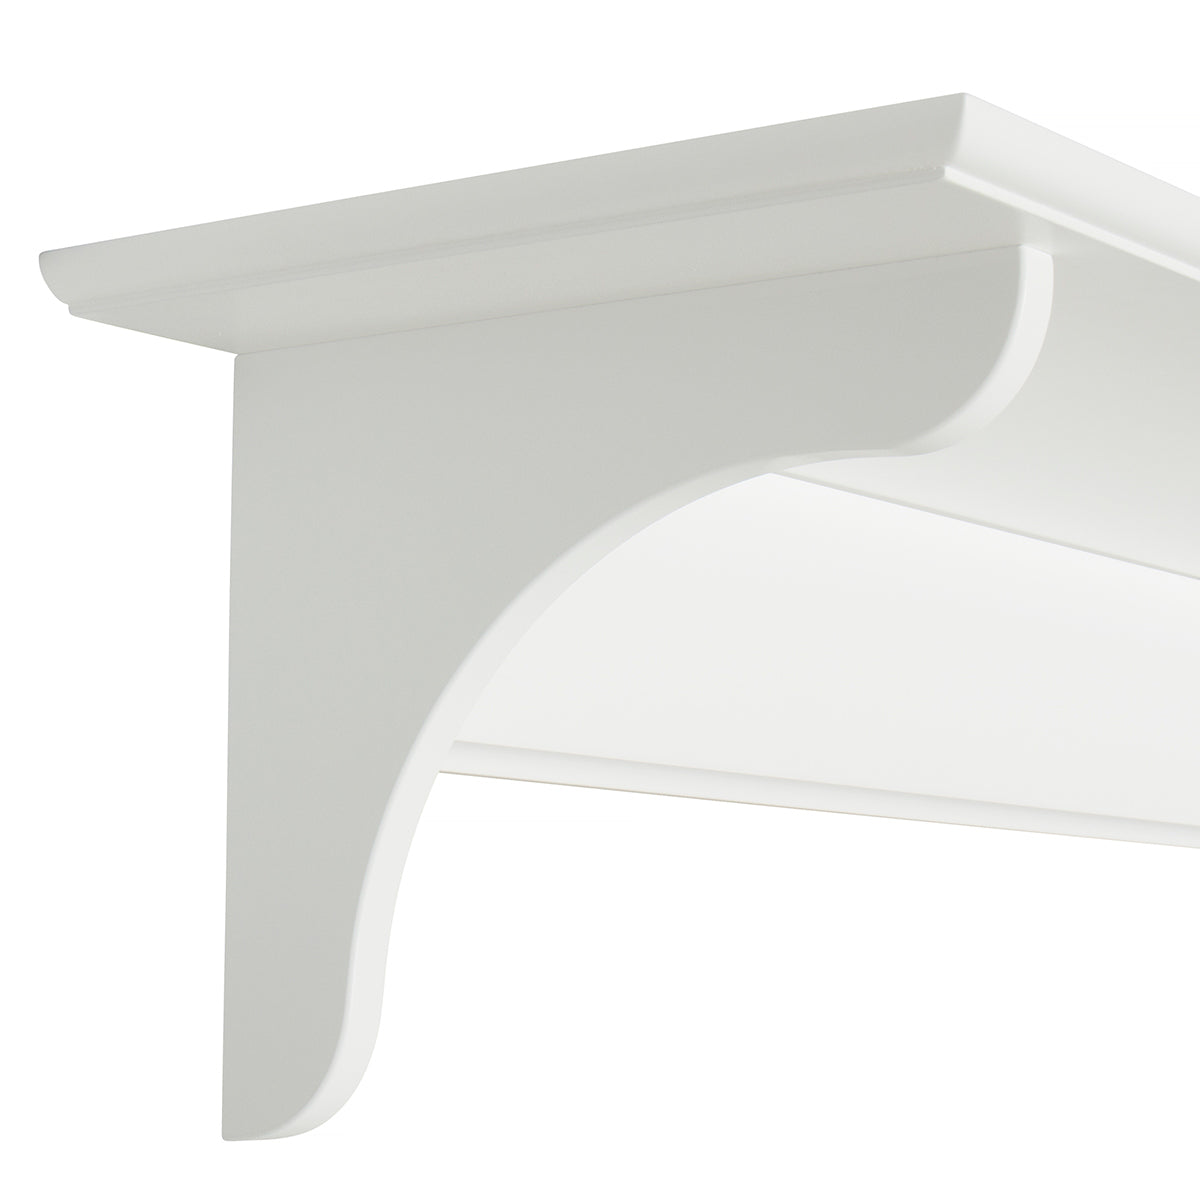 Oliver Furniture wall shelf with hooks, white